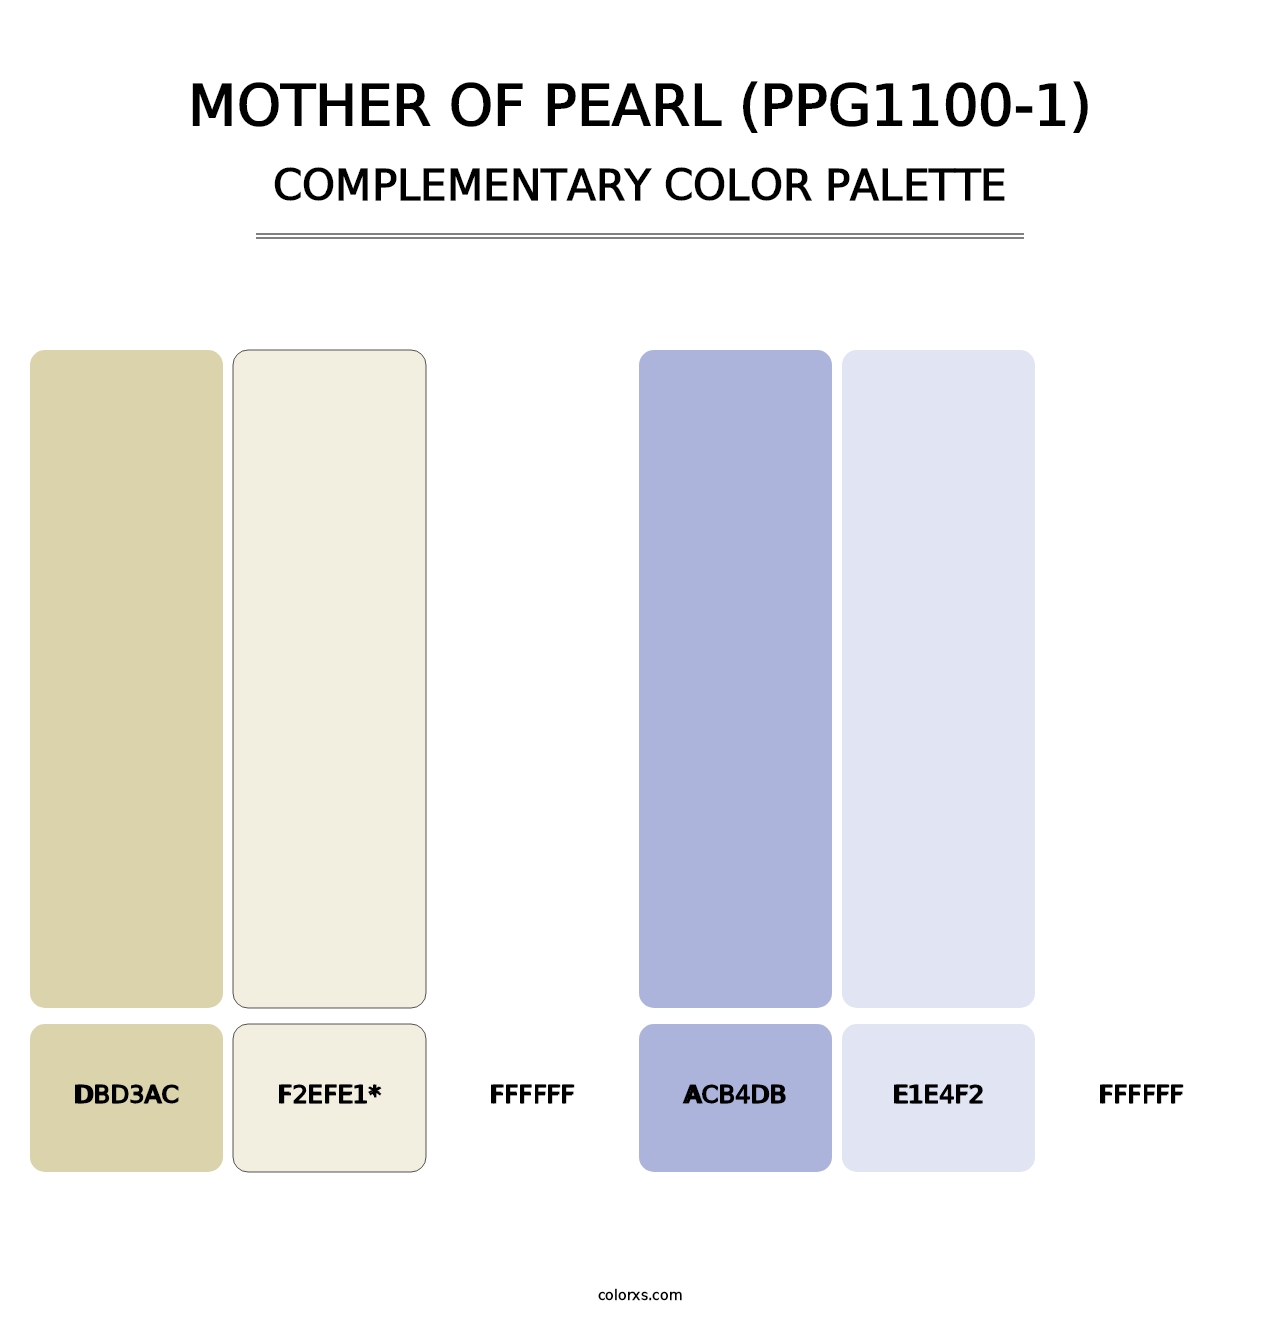 Mother Of Pearl (PPG1100-1) - Complementary Color Palette